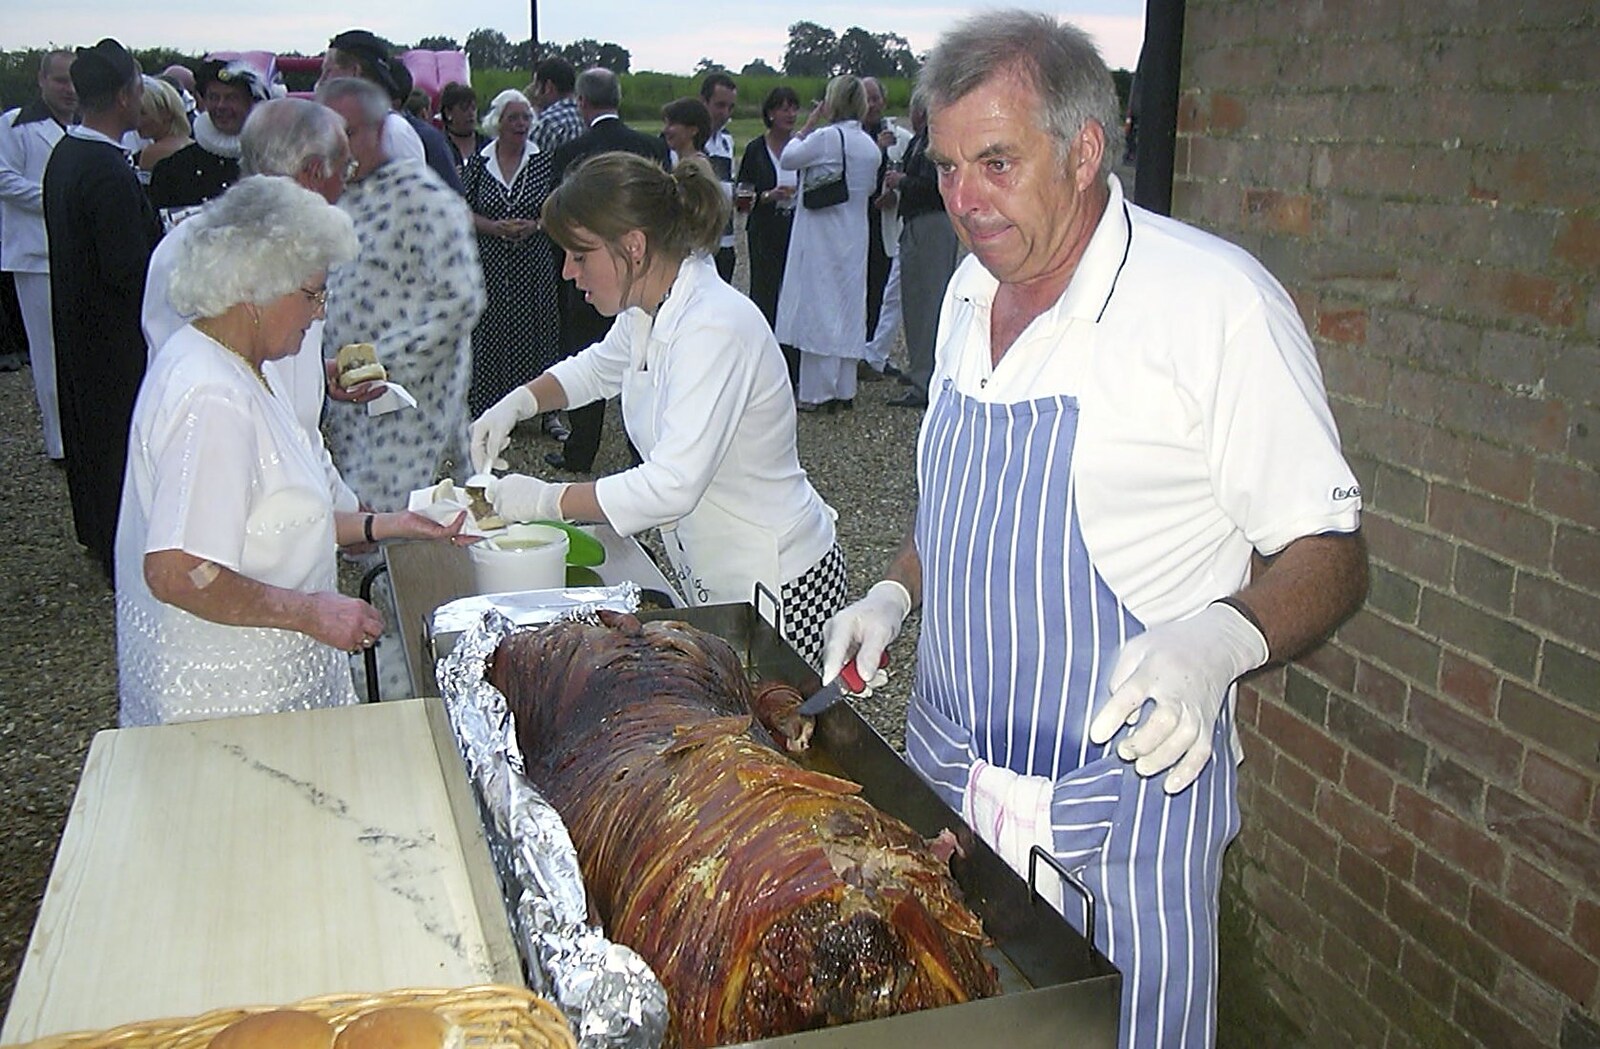 The hog roast occurs from The BBs at Great Ellingham, Norfolk - 18th July 2003